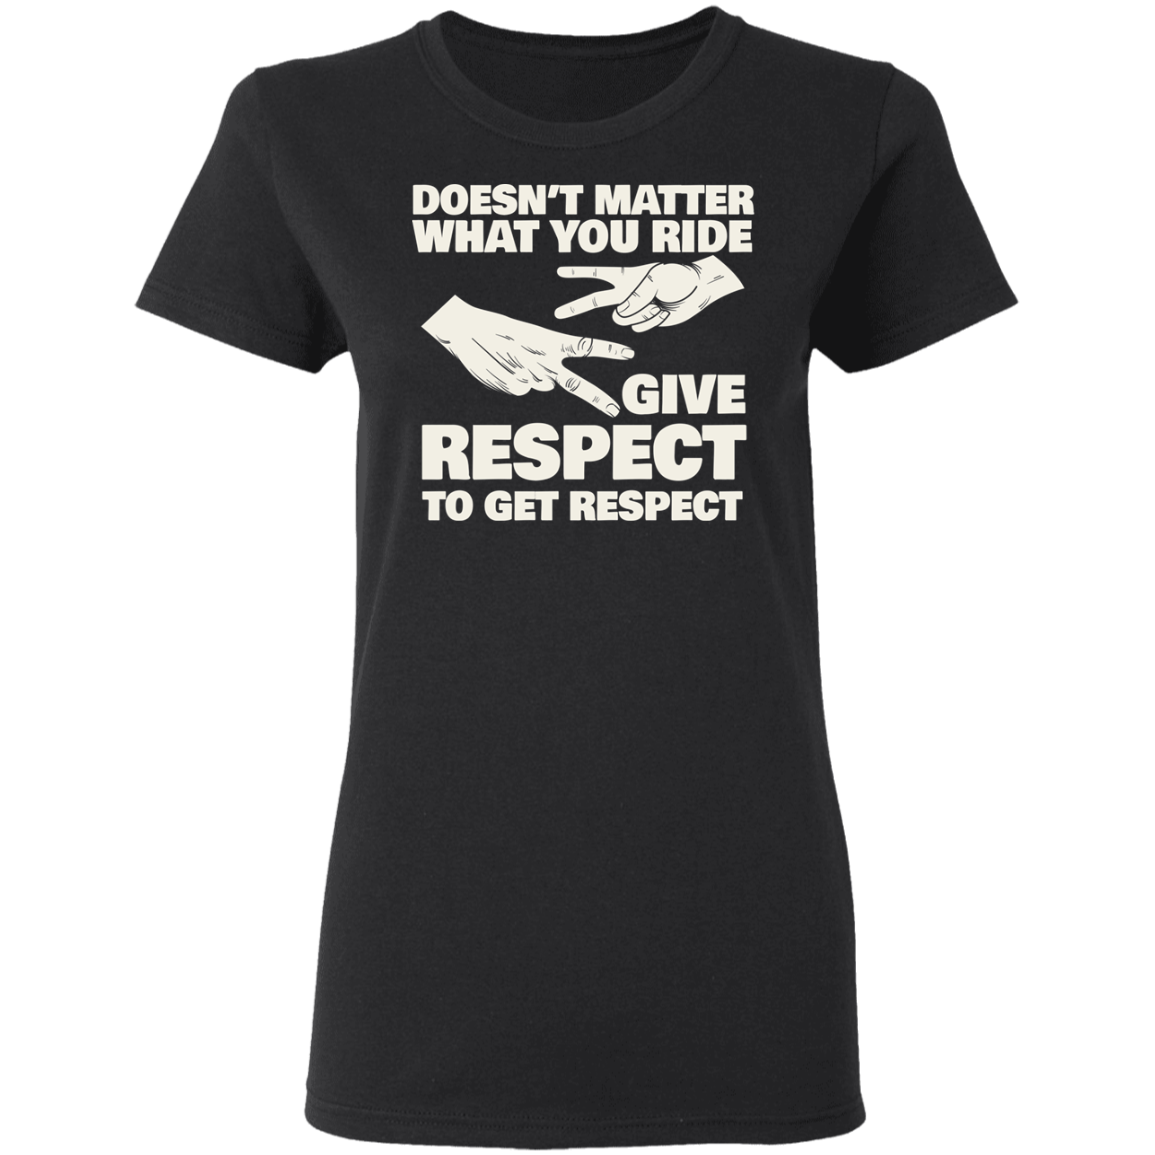 Doesn’t matter what you ride, give respect to get respect Biker Shirt